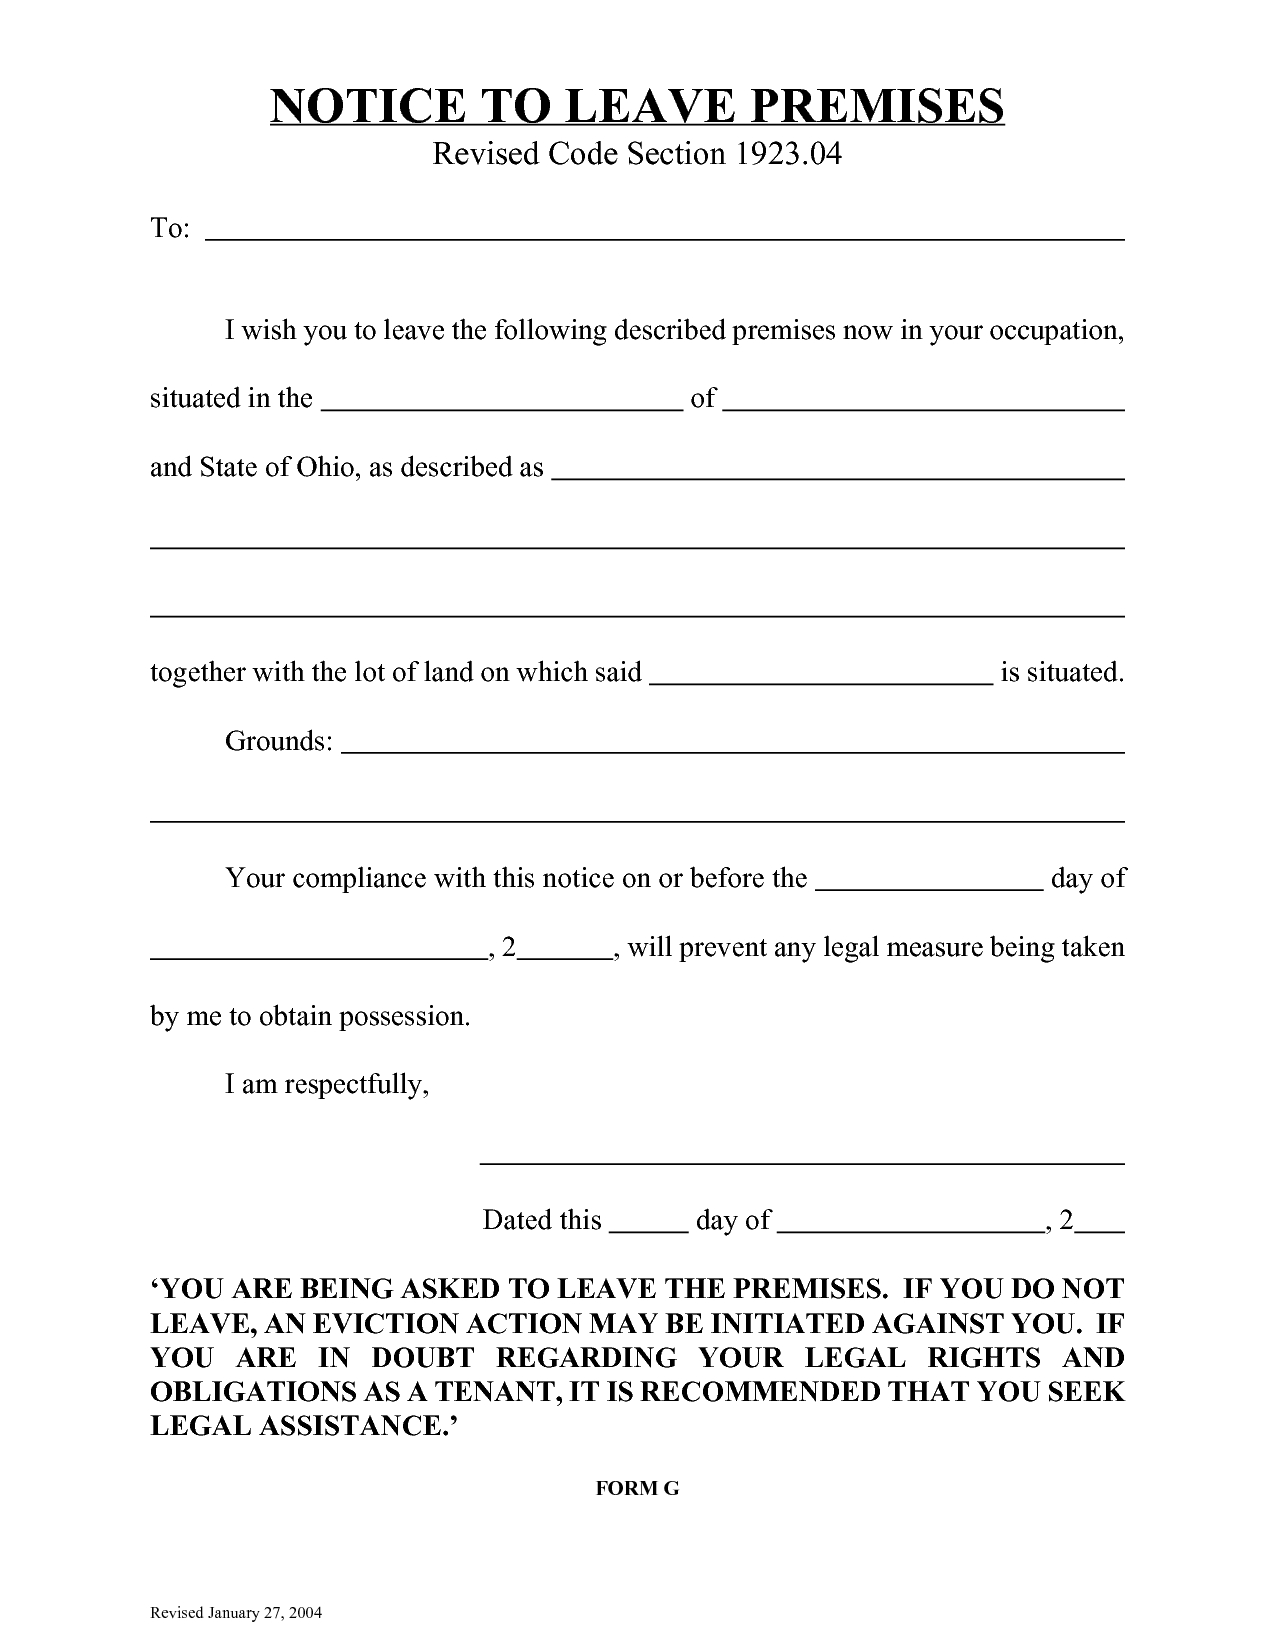 10 Best Images Of Eviction Notice Florida Form Blank Template Via 3 - Free Printable Blank Eviction Notice